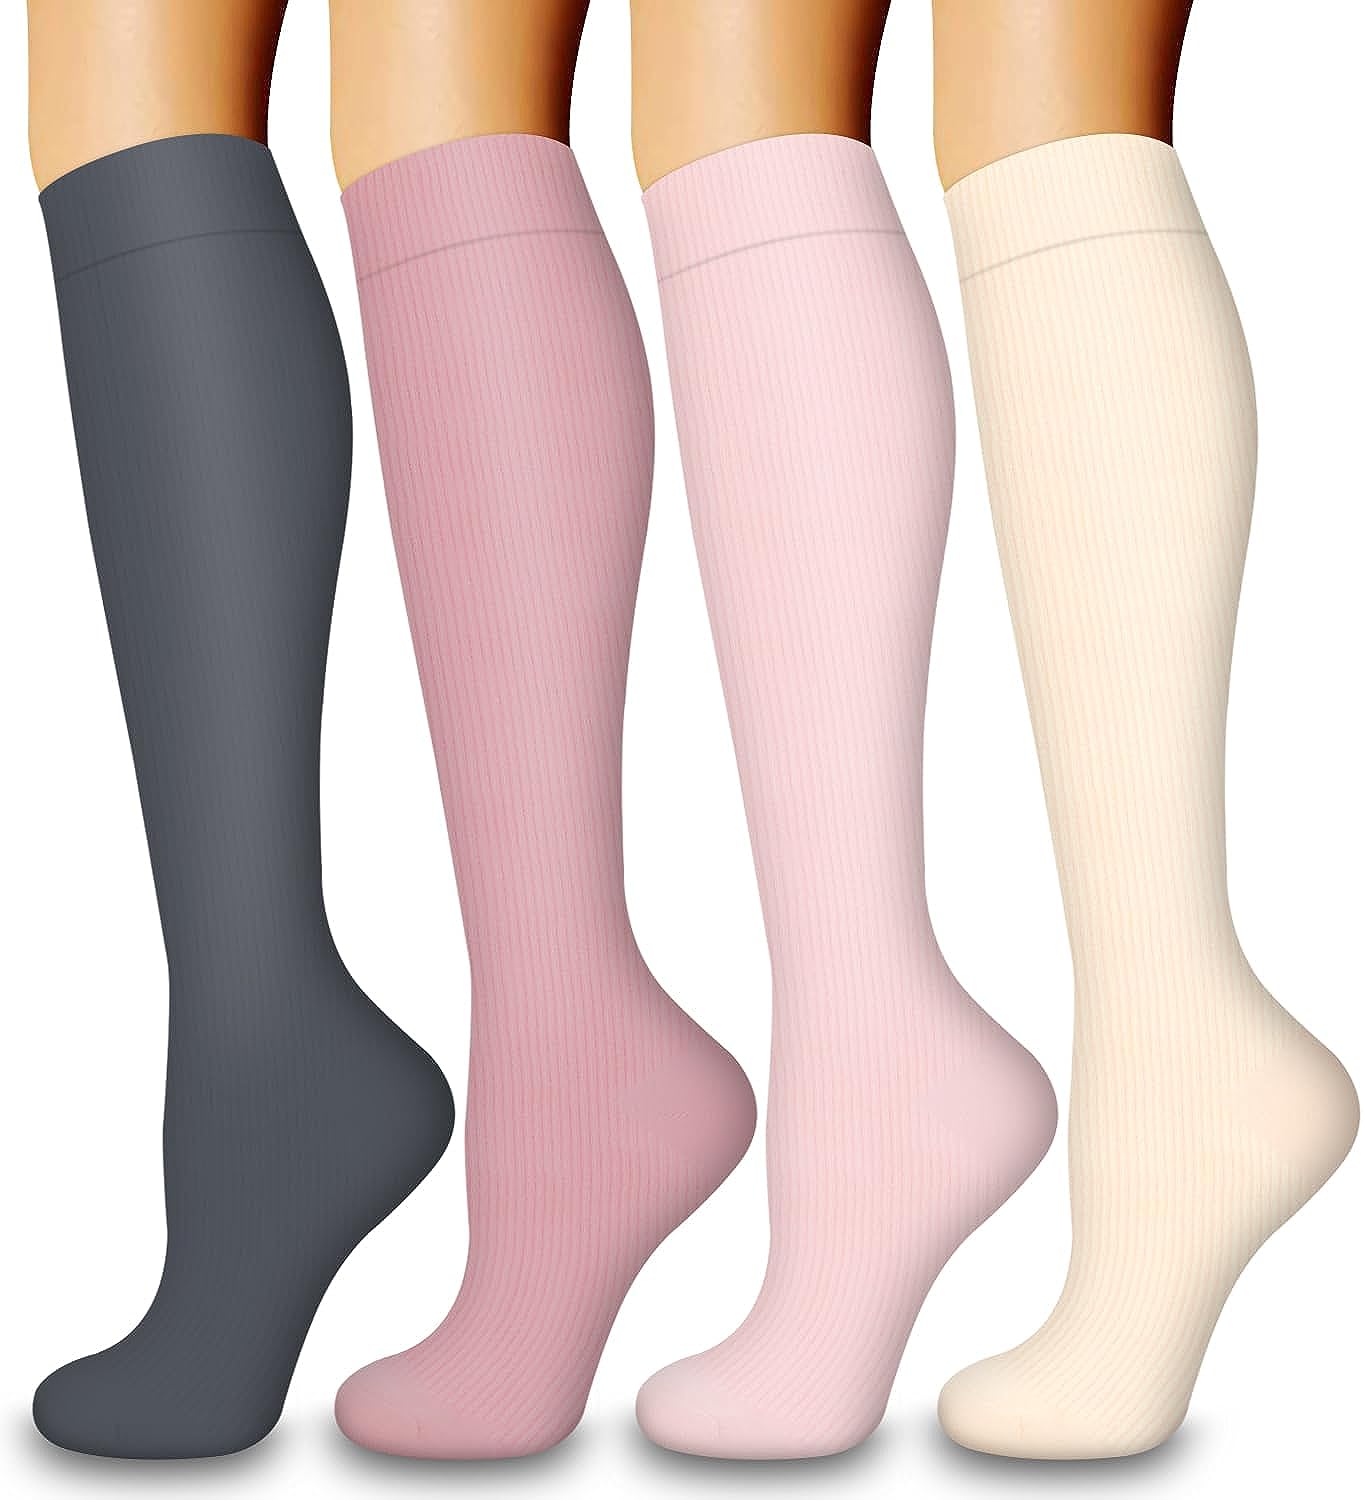 Laite Hebe 4 Pairs-Compression Socks for Sale in Peoria, AZ - OfferUp